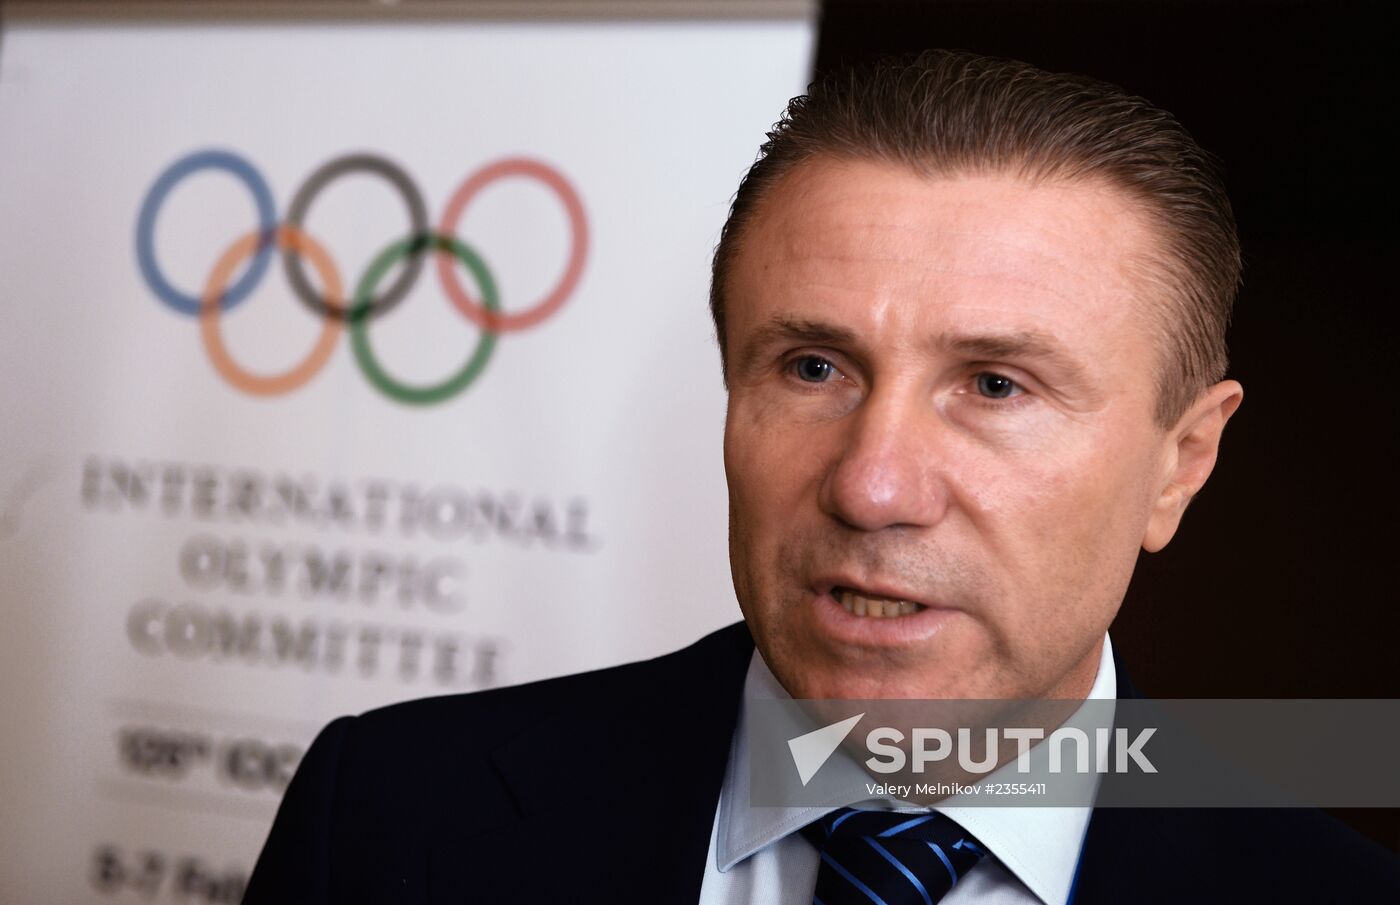 Meeting of International Olympic Committee's Executive Board